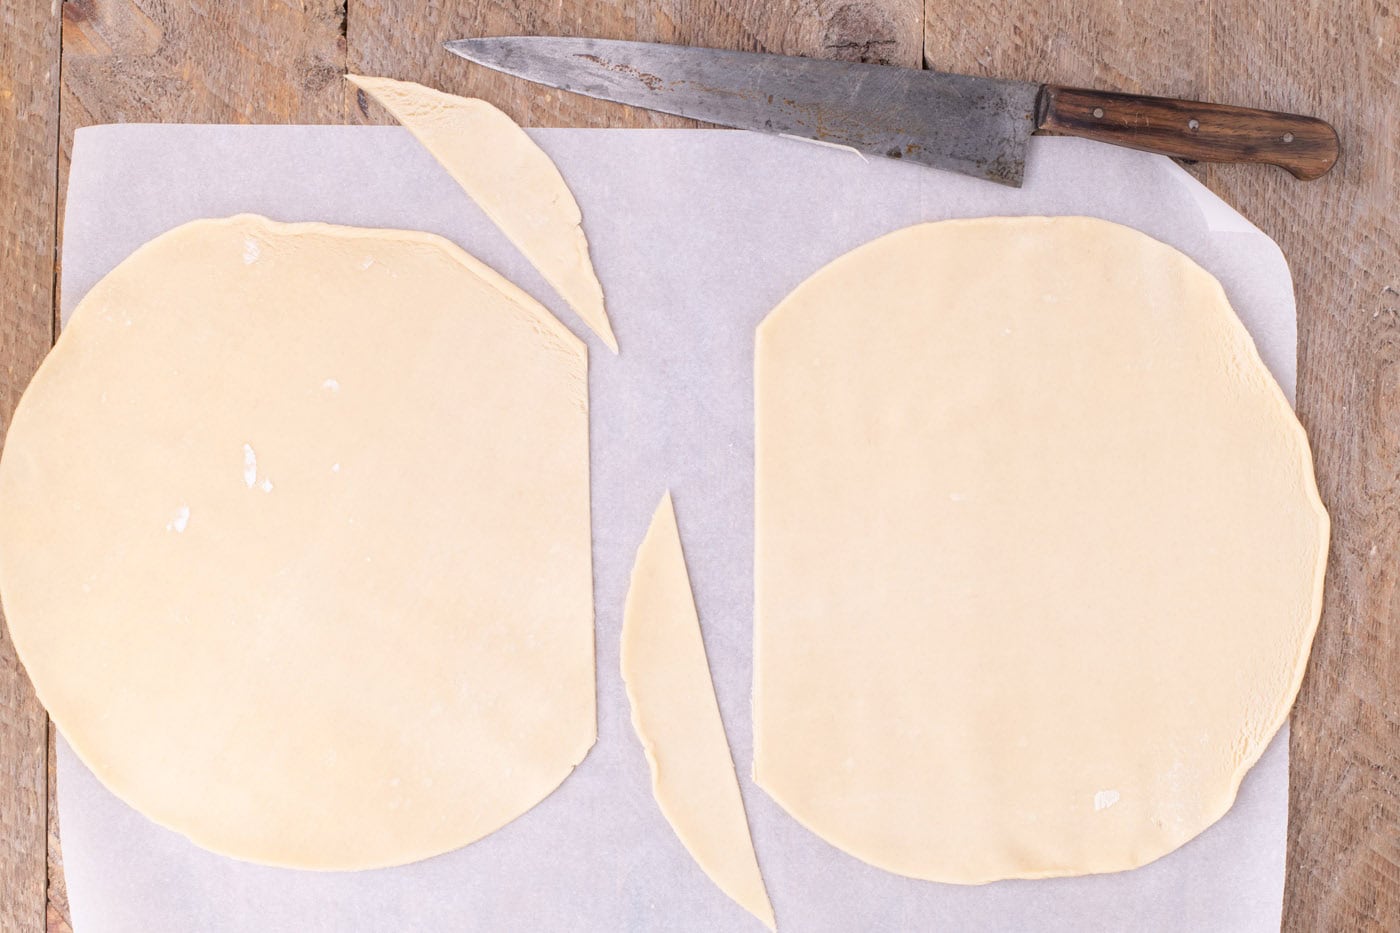 trimmed premade pie crust on parchment paper